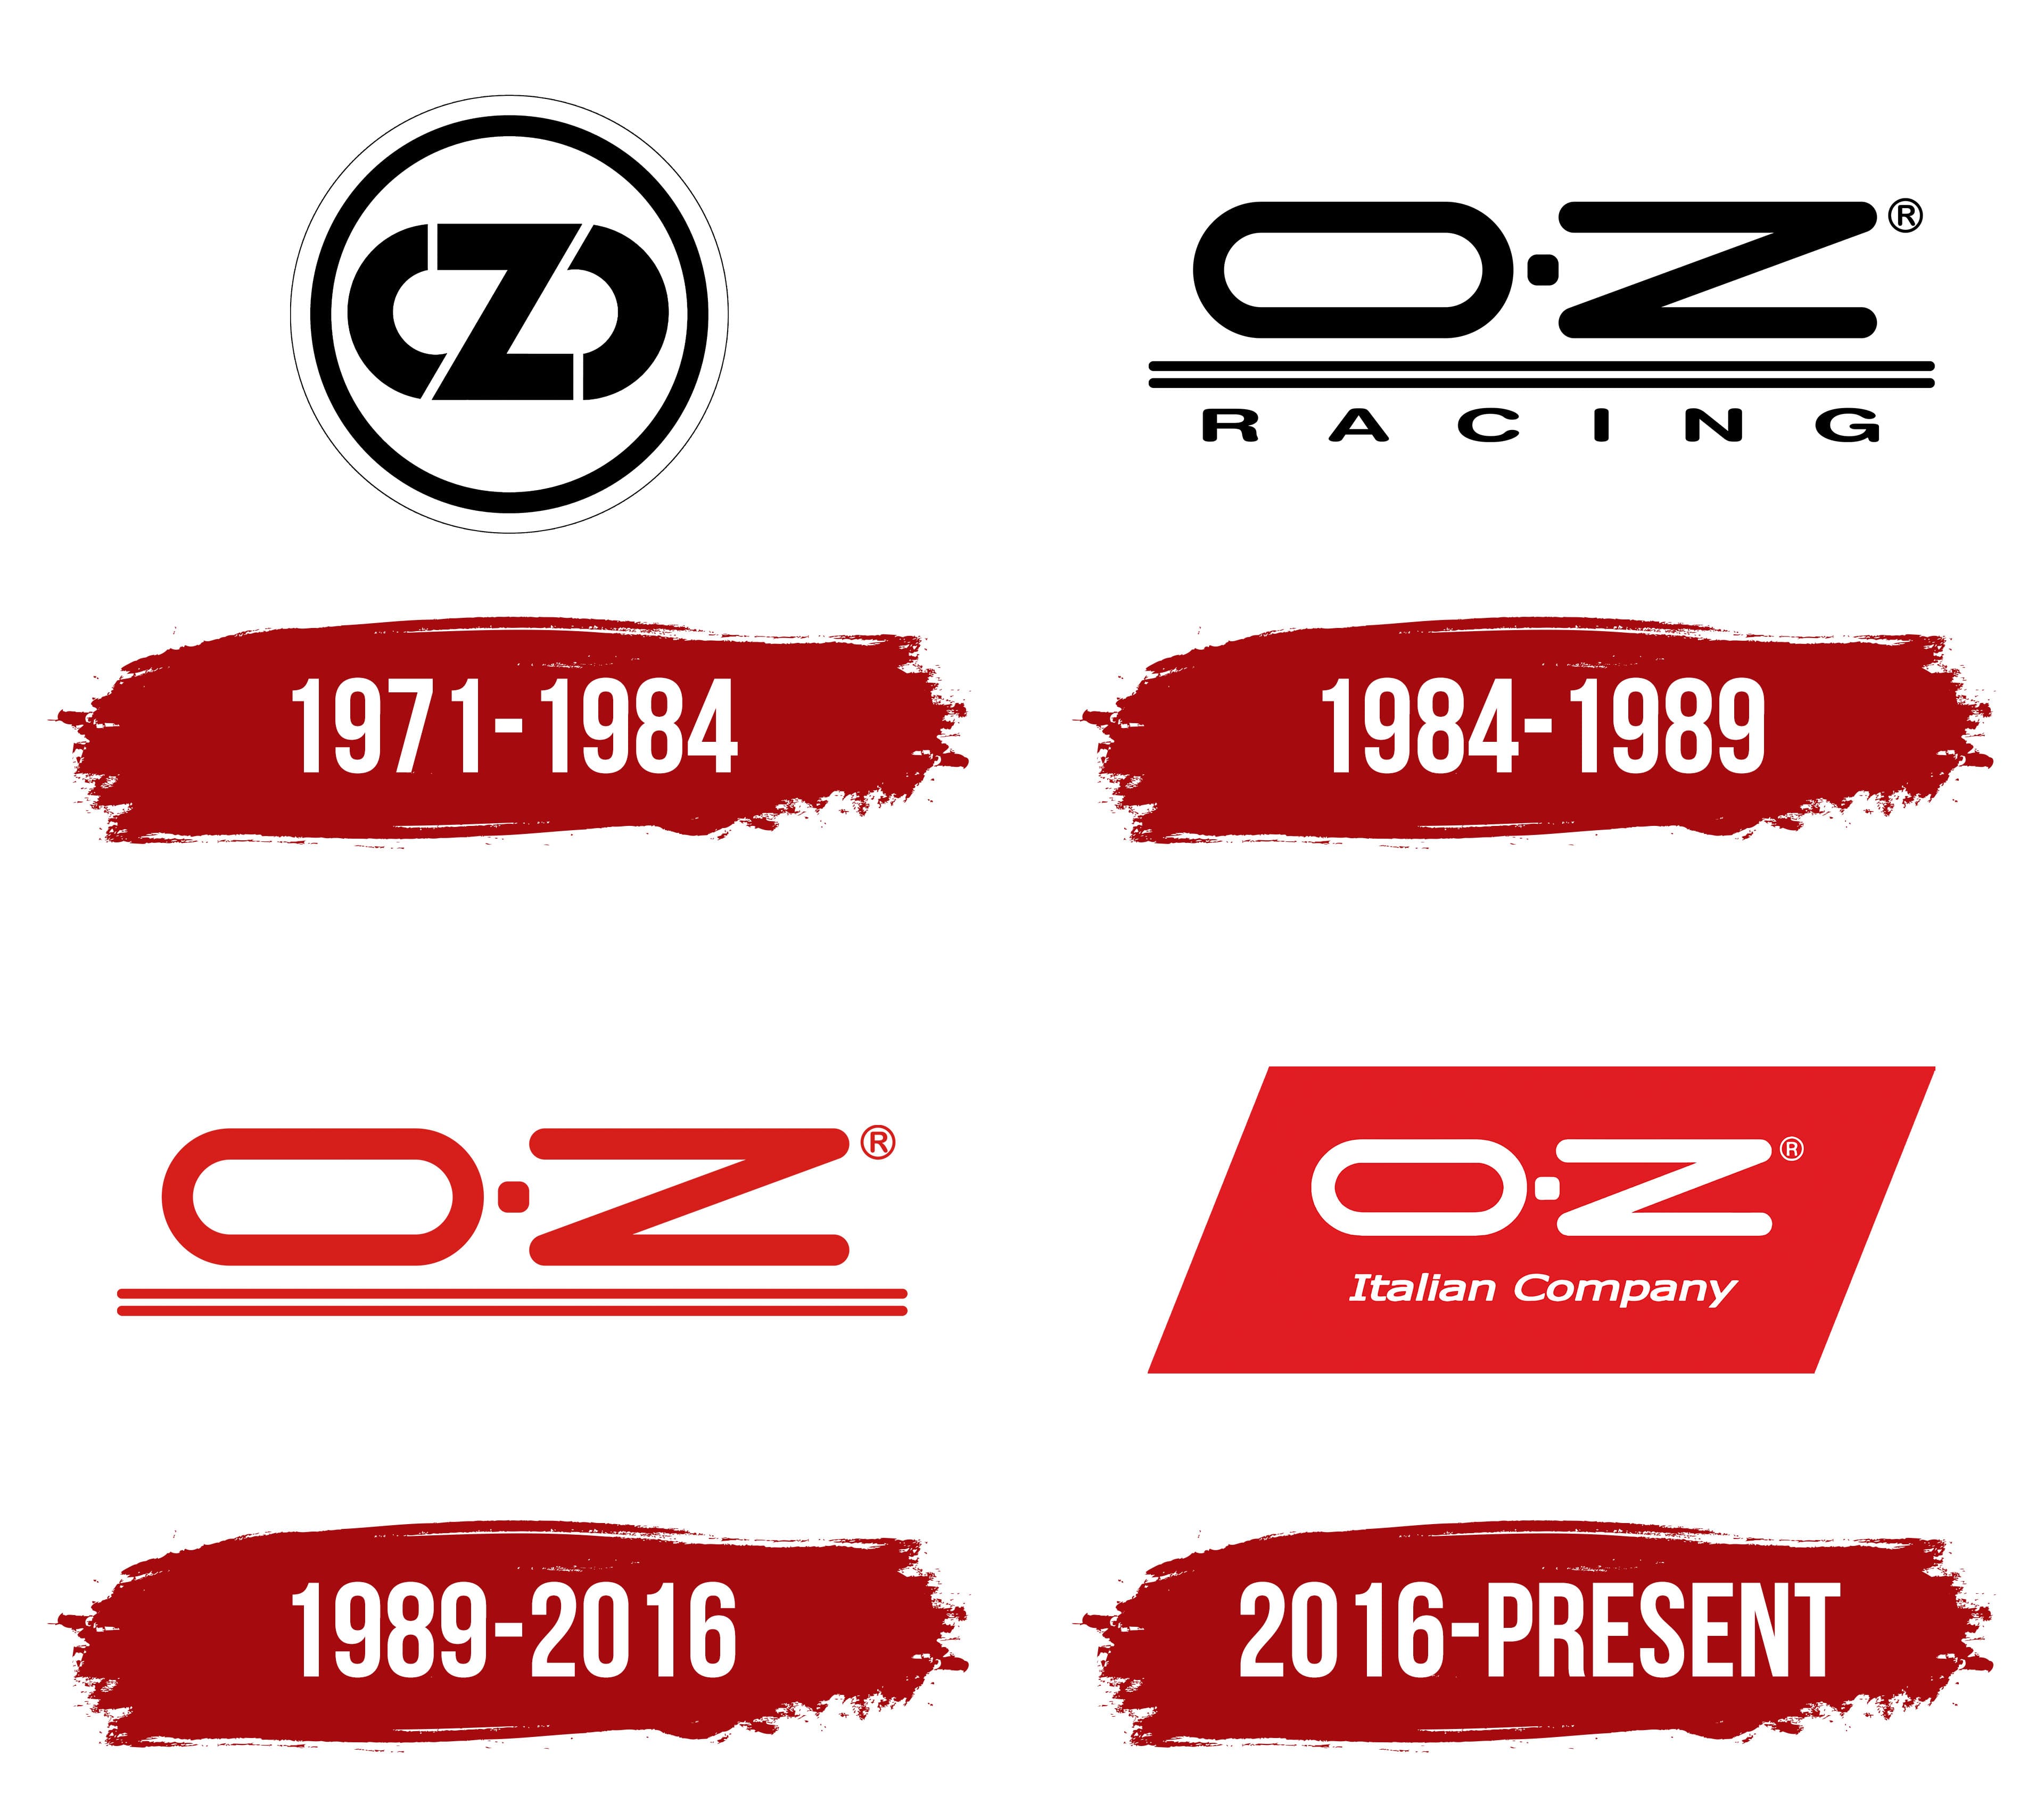 OZ Racing Logo, symbol, meaning, history, PNG, brand